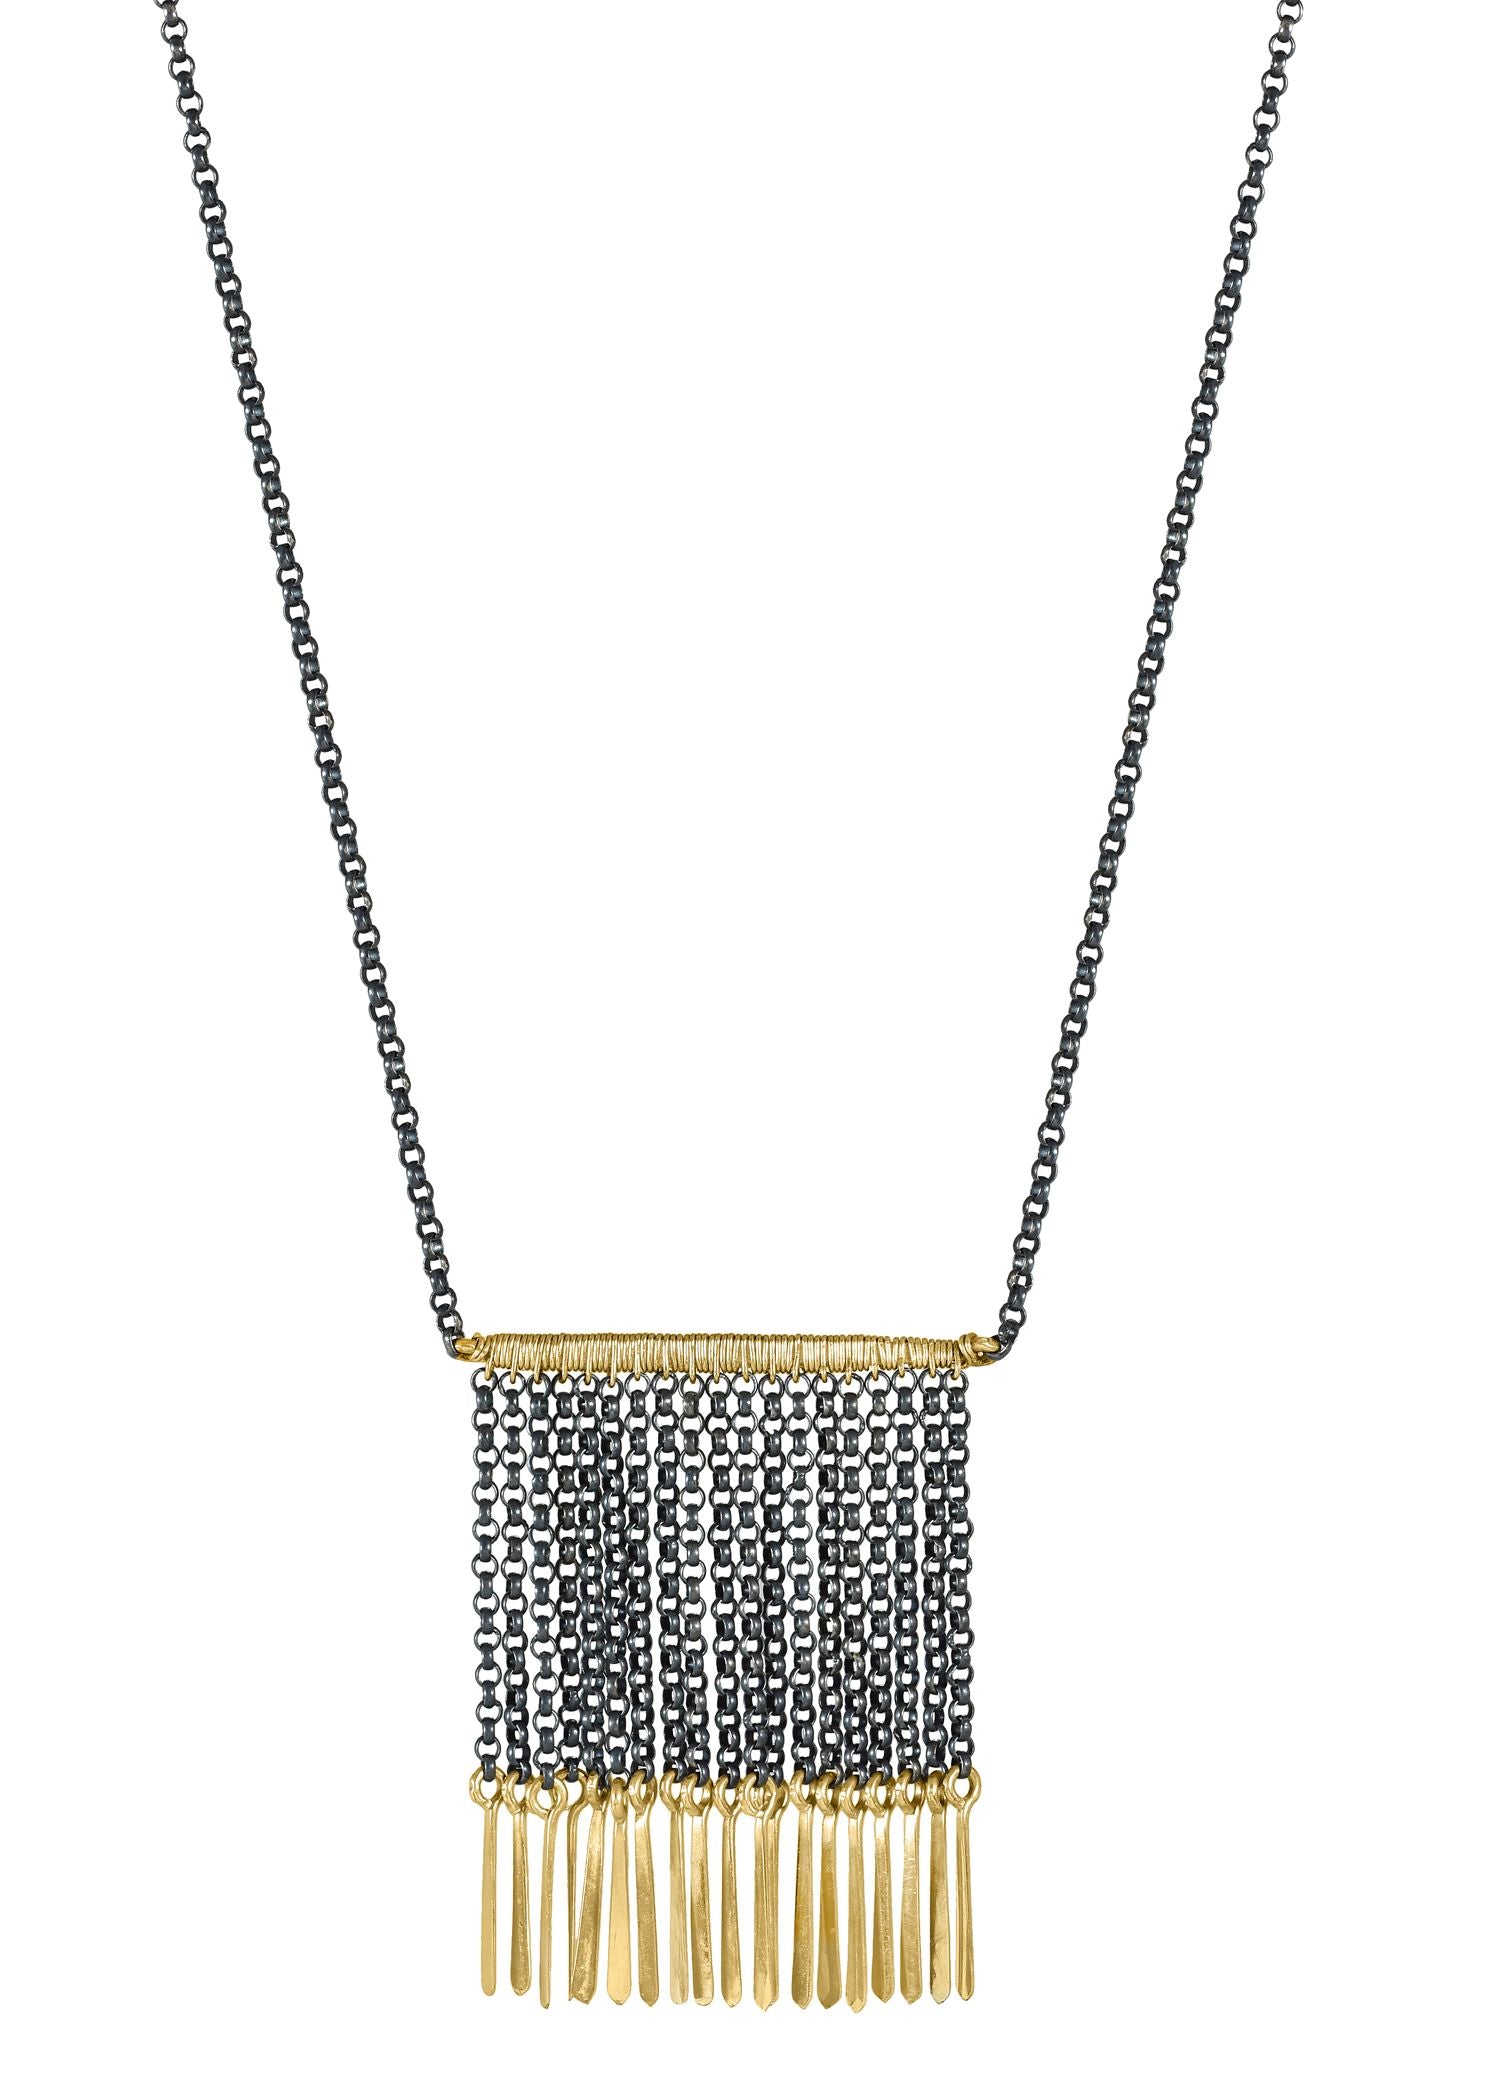 14k gold fill Blackened sterling silver Mixed metal Necklace measures 17-1/8” in length Pendant measures 1-7/8” in length and 1-1/8” in width Handmade in our Los Angeles studio